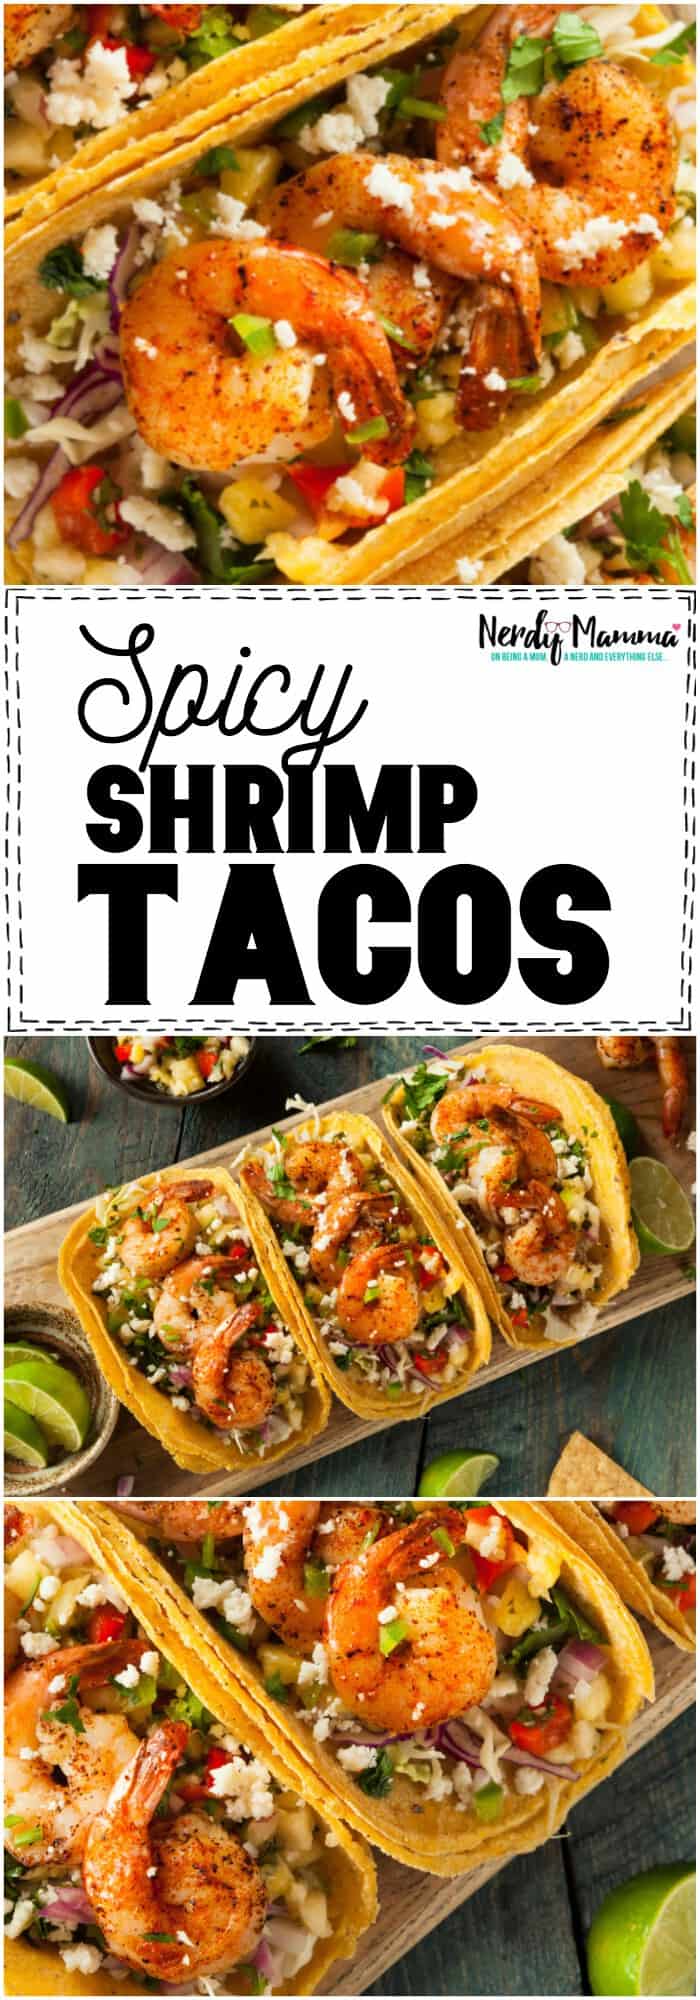 I. LOVE. These Spicy Shrimp Tacos. They're so good. #shrimp #shrimprecipe #taco #tacotuesday #tacos #tacorecipe #shrimptaco #shrimptacorecipe